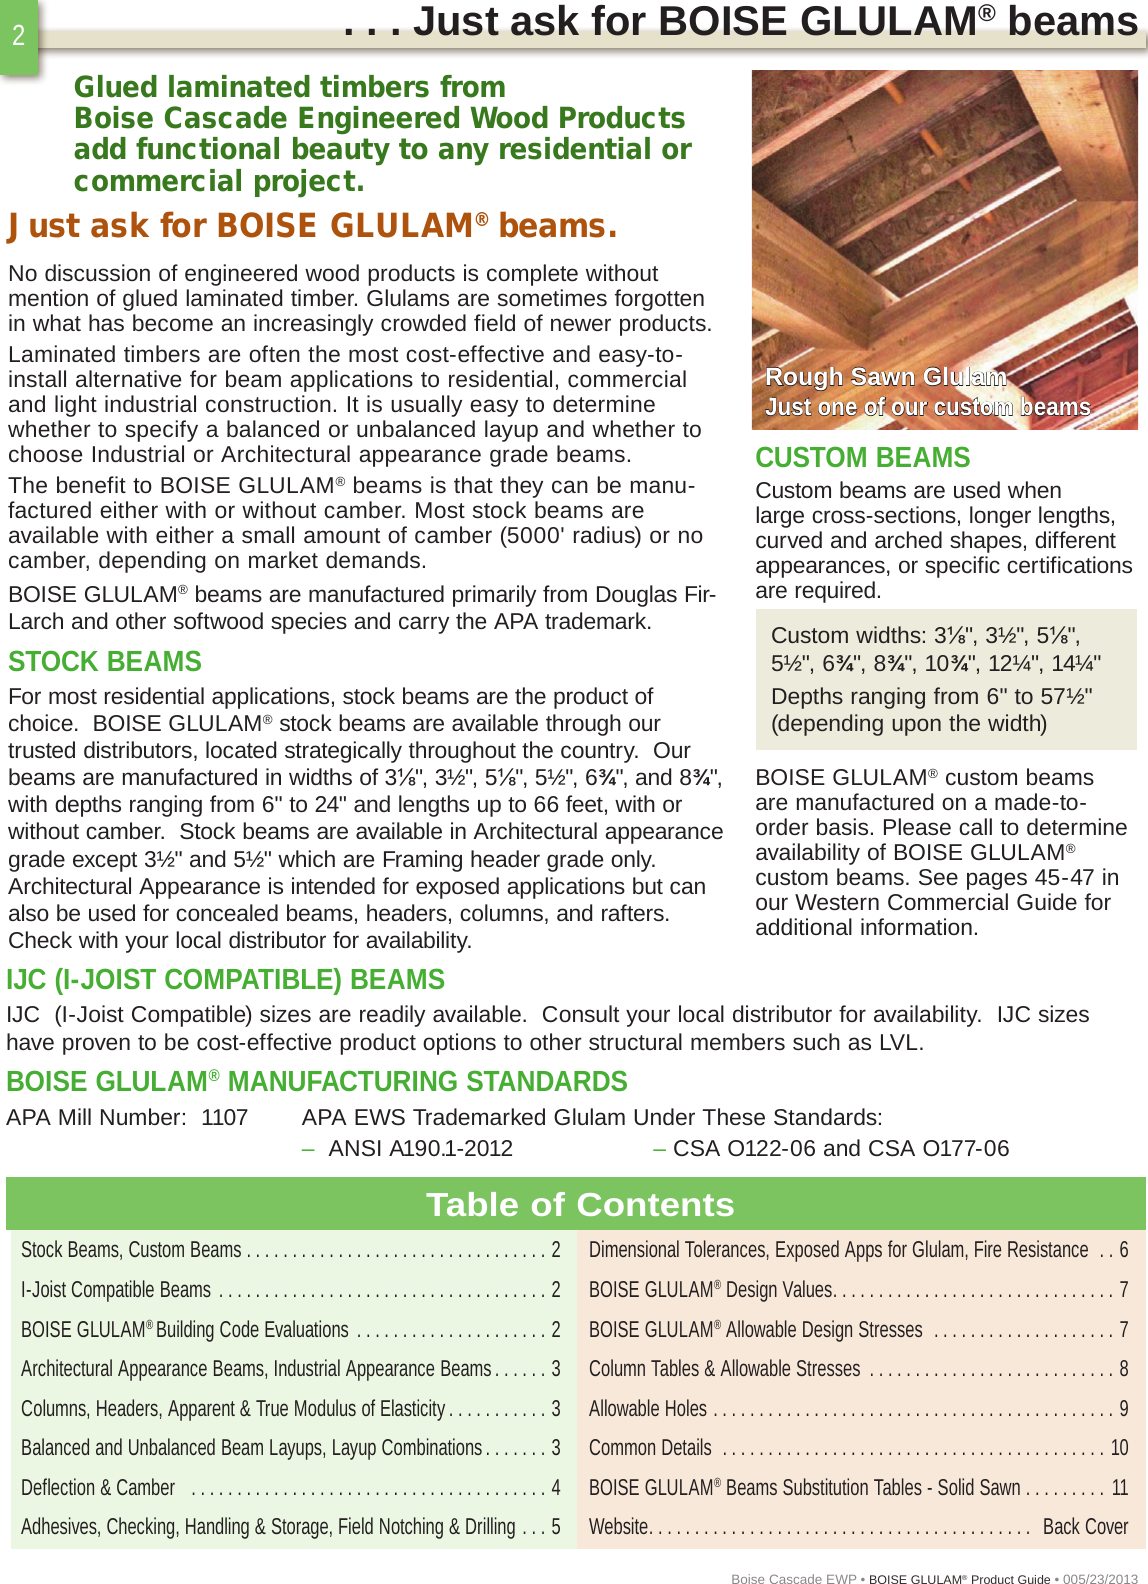 Page 2 of 12 - Boise Glulam Product Guide